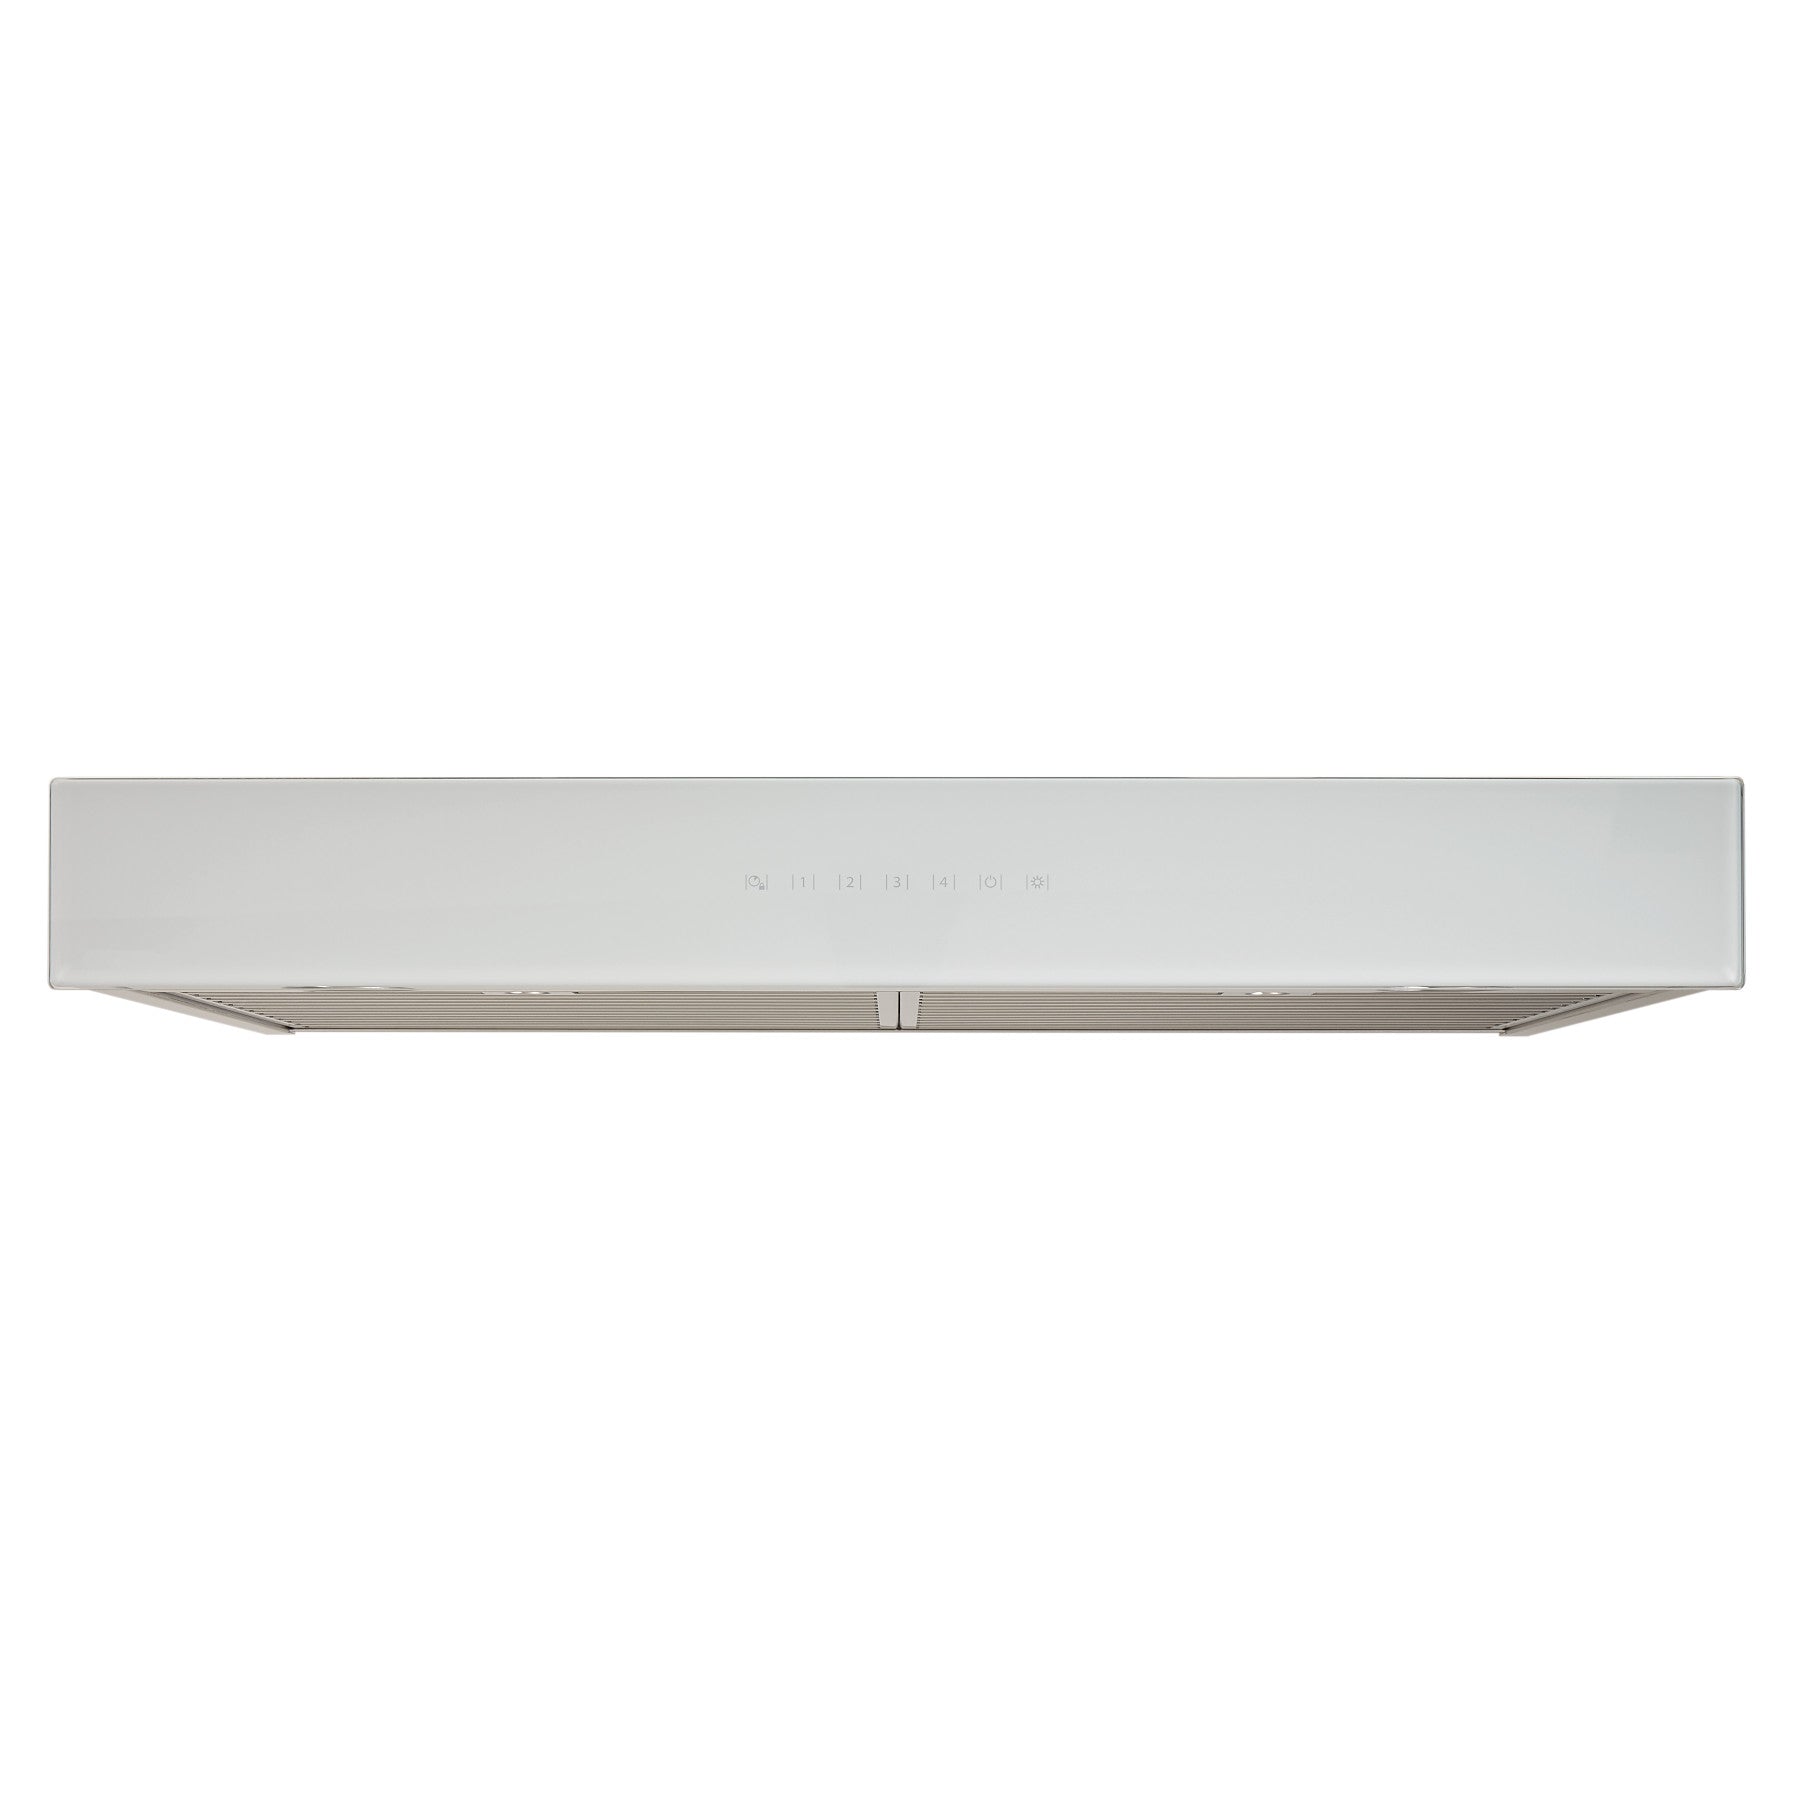 Best - 29.88 Inch 550 CFM Under Cabinet Range Vent in Stainless - UCB3I30SBW